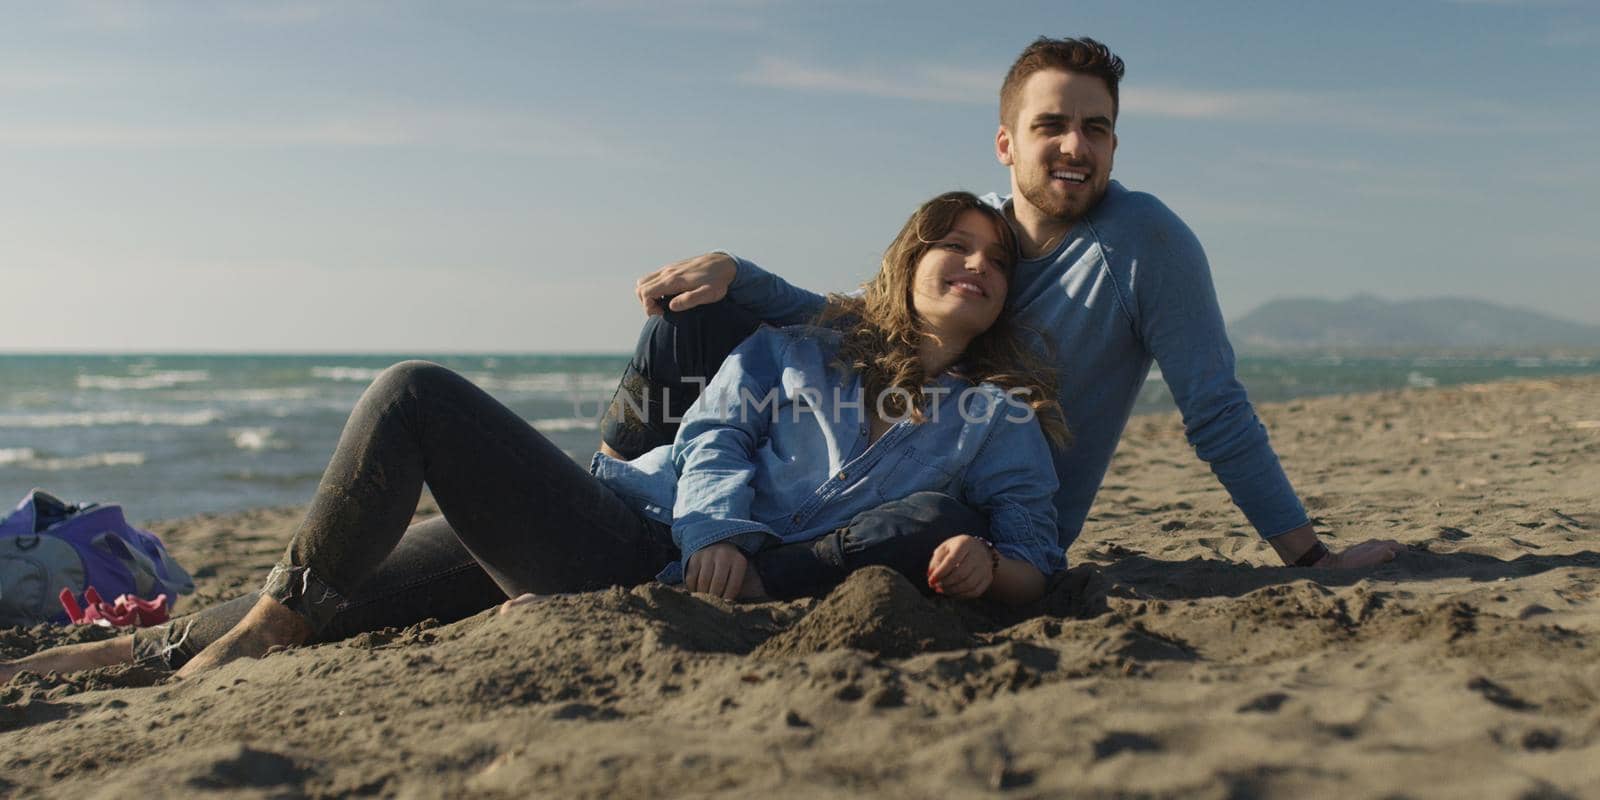 Couple enjoying time together at beach by dotshock